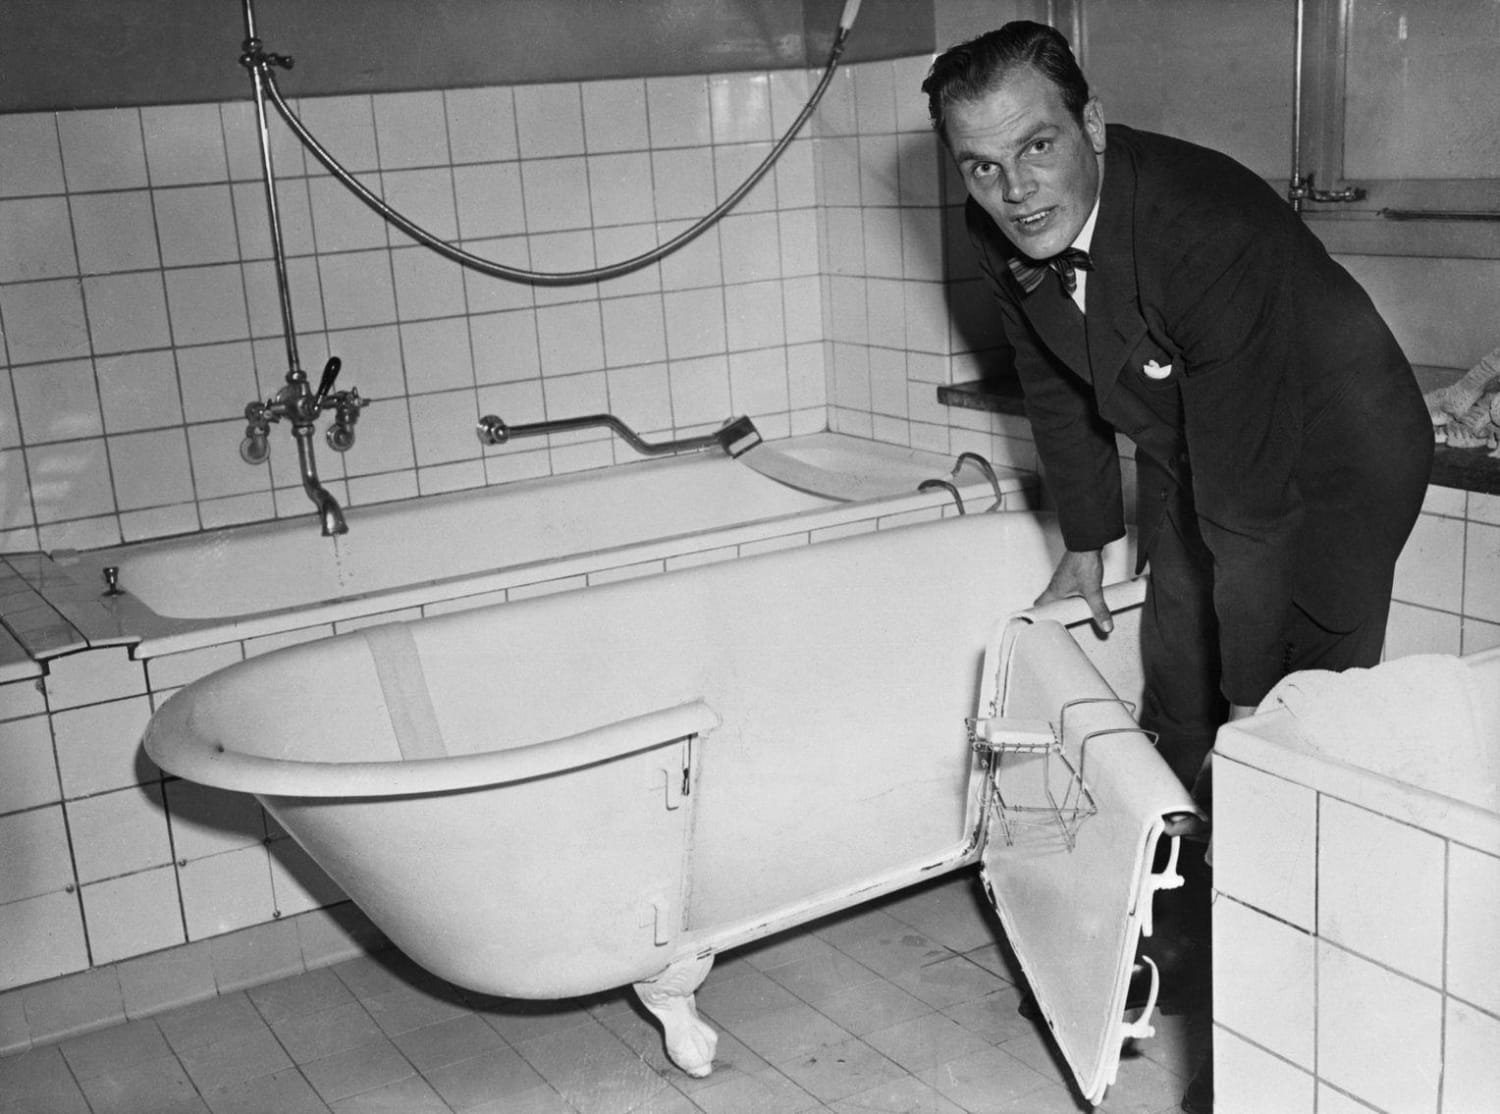 Per Bergmann proudly introducing his latest invention, which was intended to make it easier for old and disabled people to get in and out of the bathtub. Sadly for Per, having a door on a bathtub proved very leaky. Sweden, 1953.